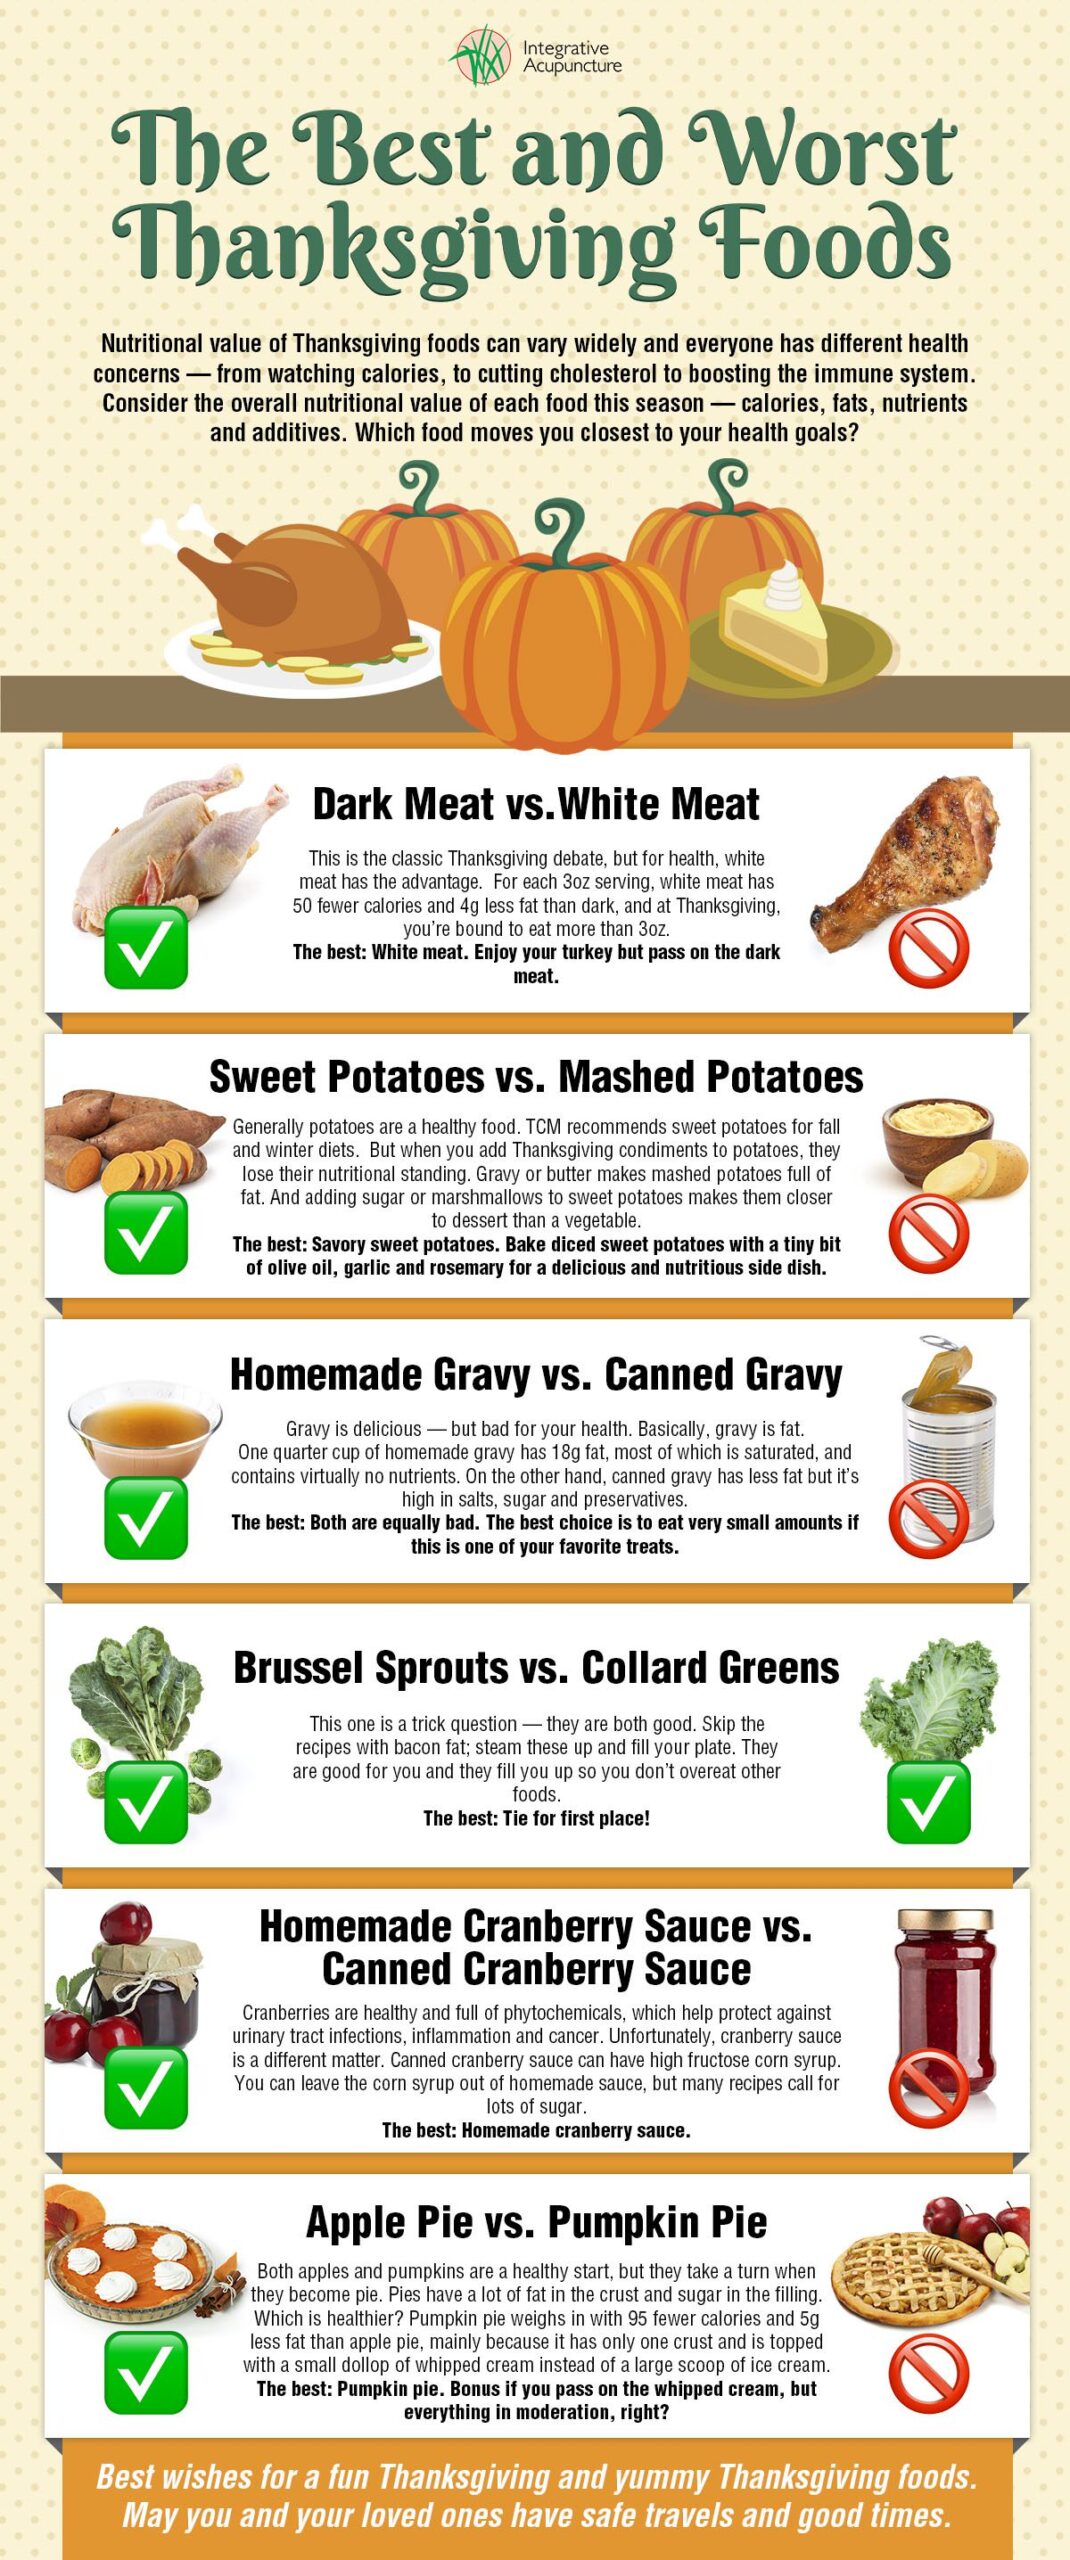 The best and worst thanksgiving foods info with pictures